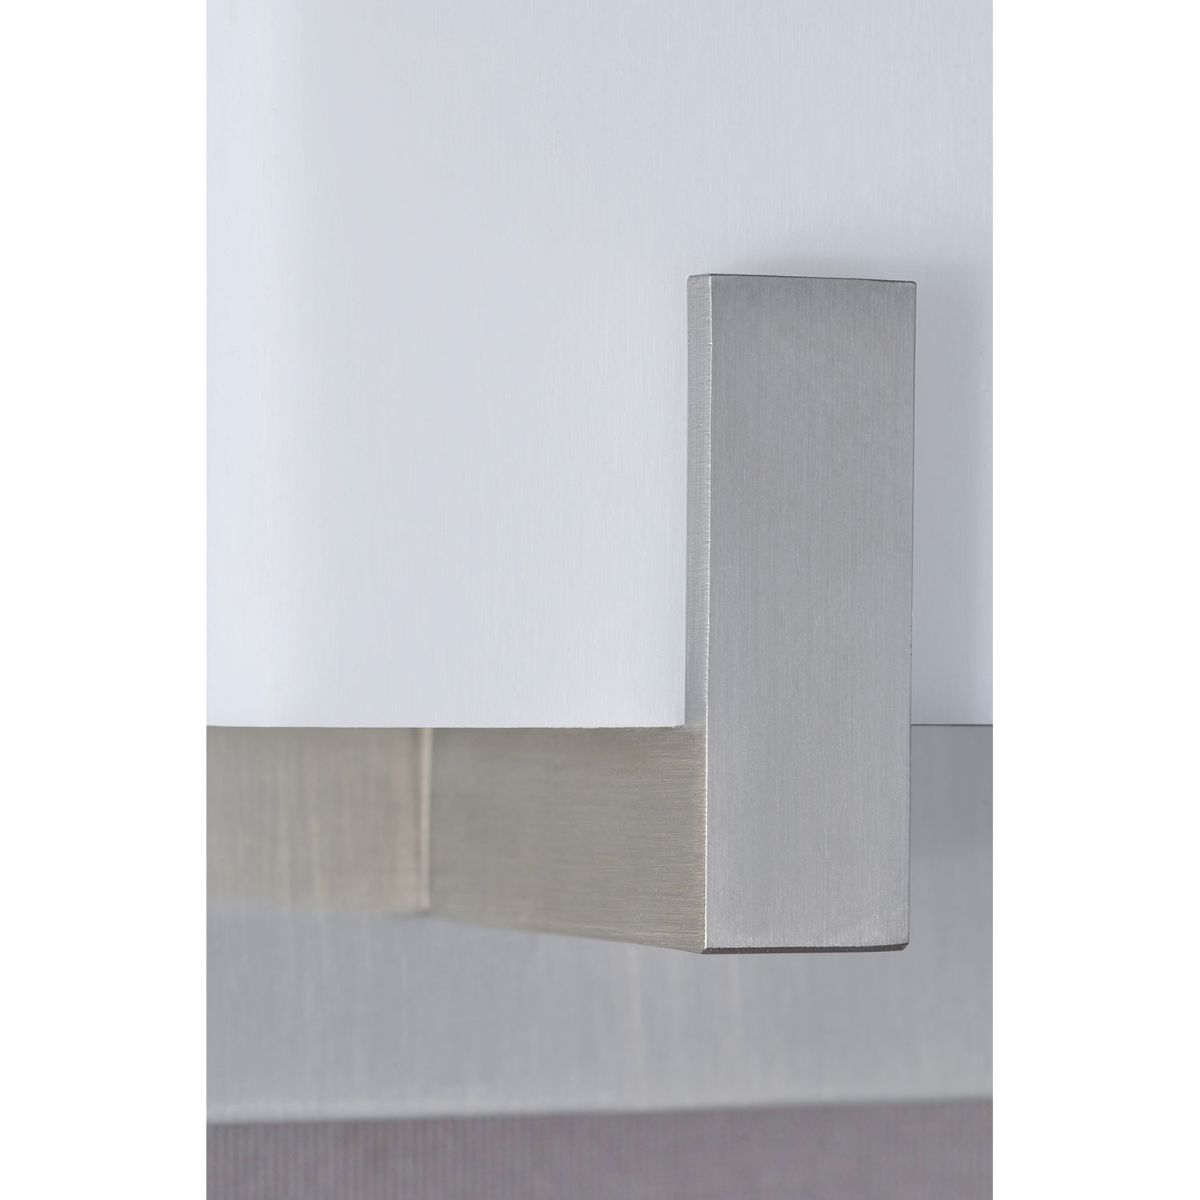 Sinclair 10 in. LED Flush Mount Sconce Satin Nickel Finish